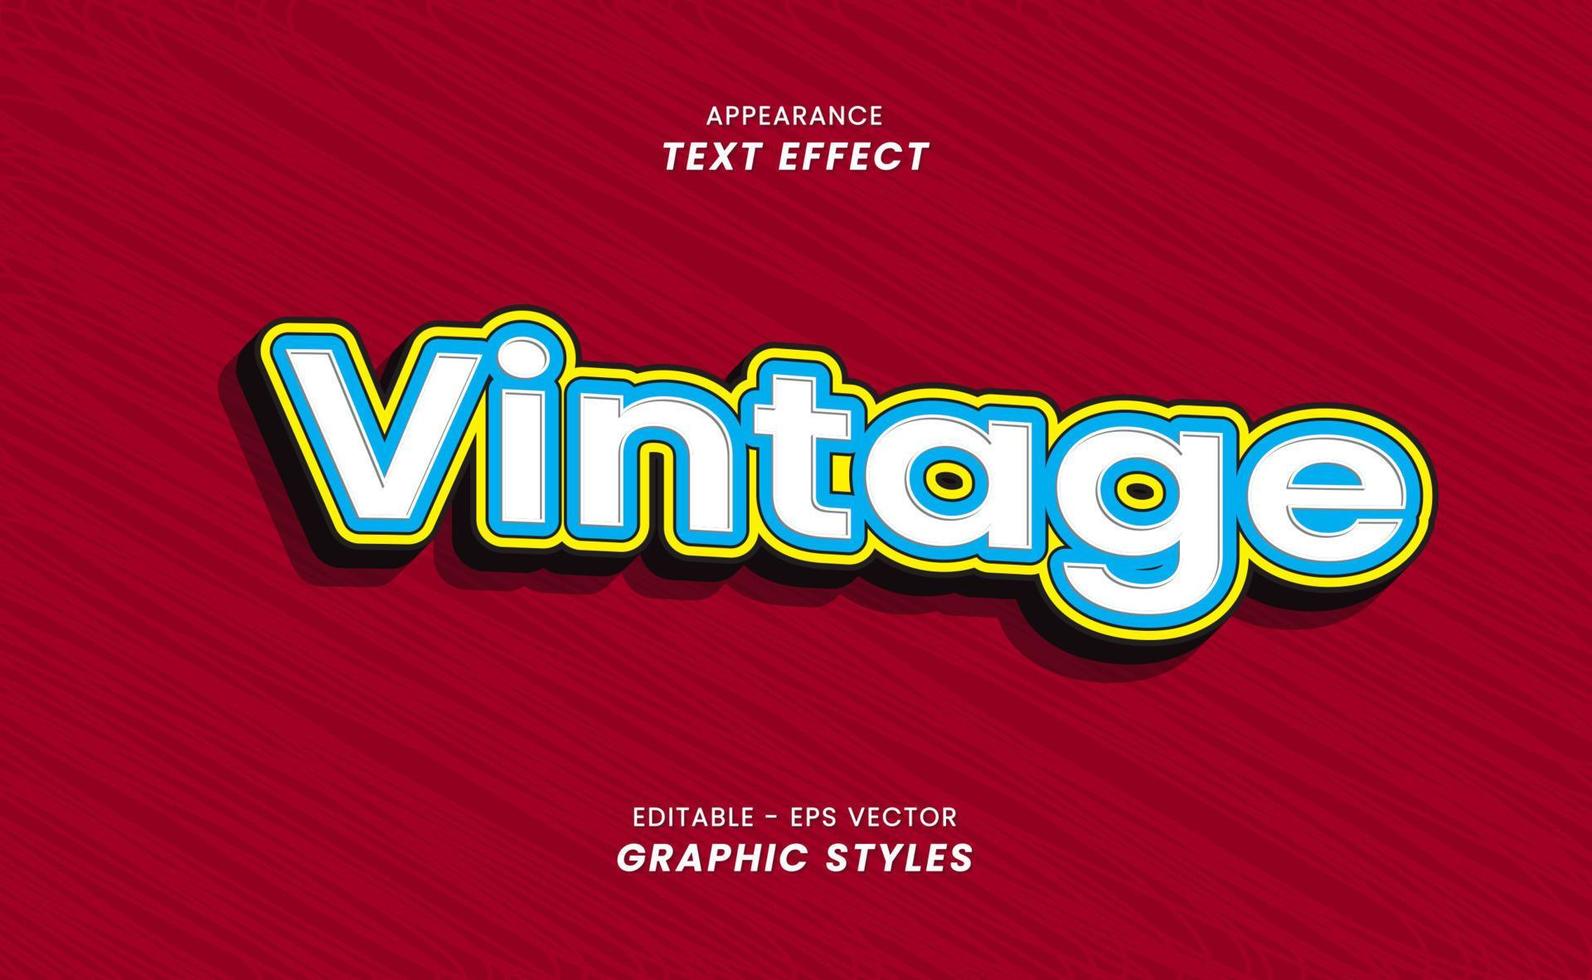 Appearance Text Effects - With Editable Vintage Words. vector